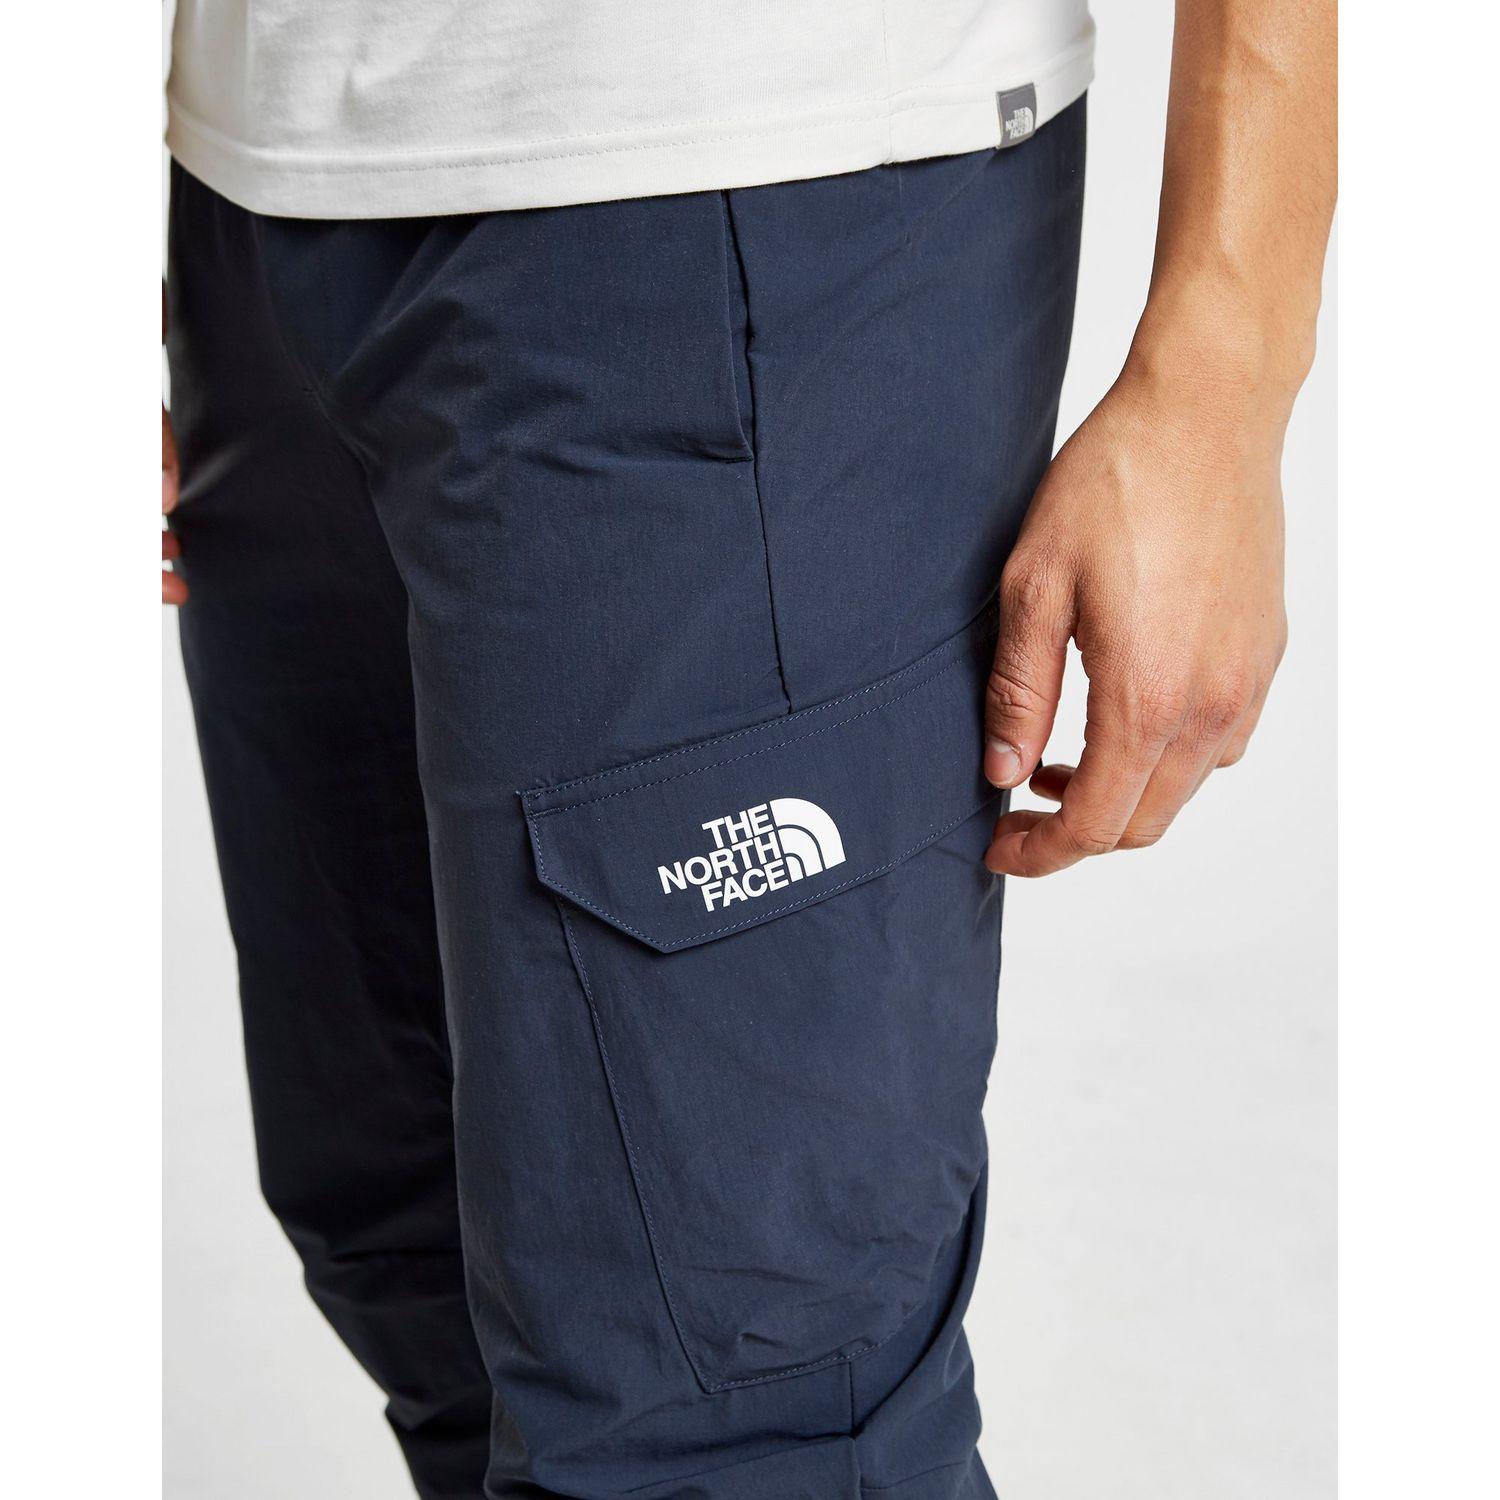 The North Face Ventacious Cargo Pants in Blue for Men - Lyst